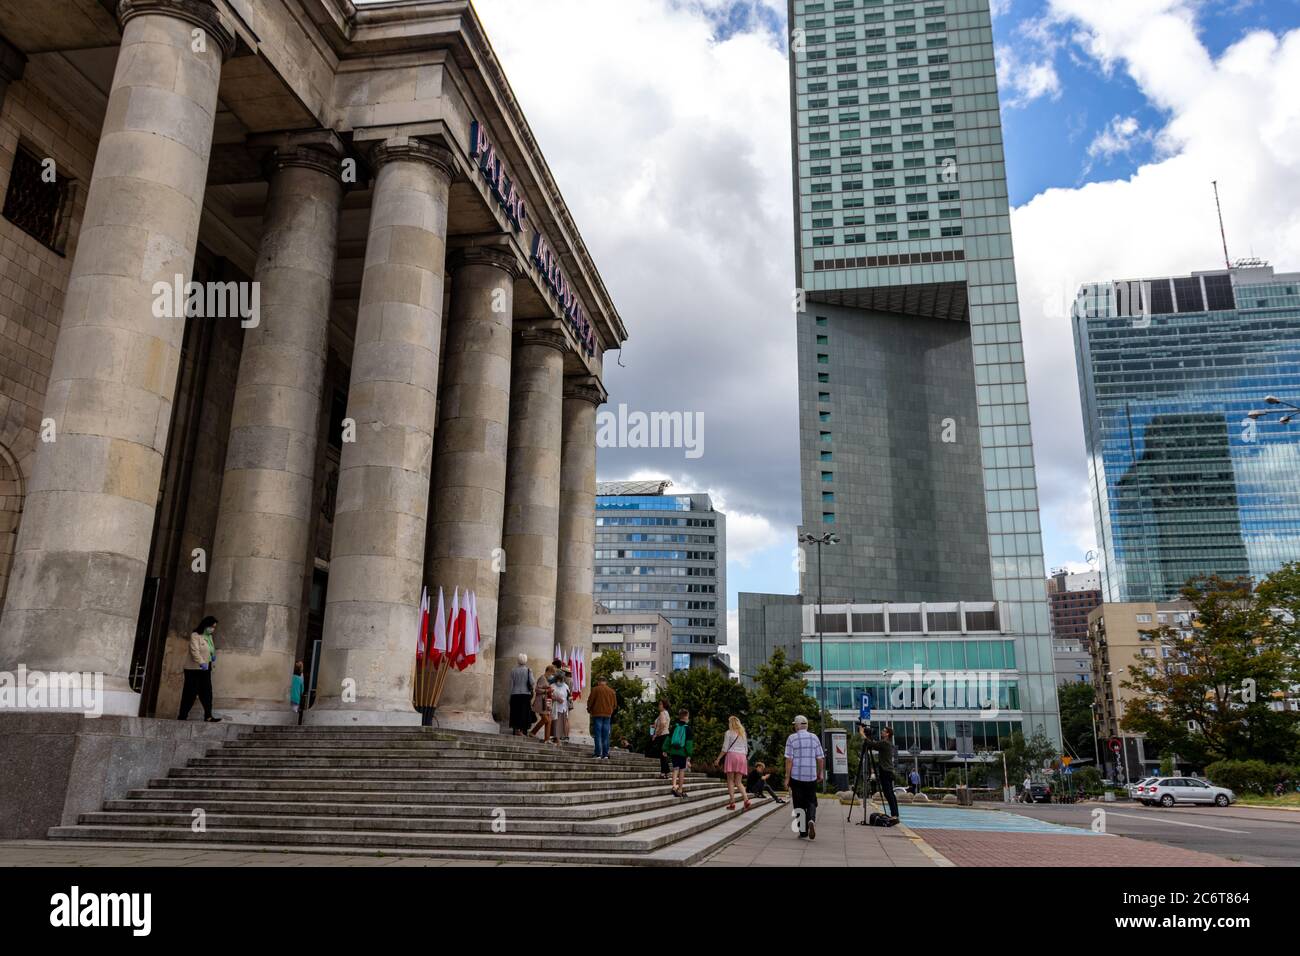 Warsaw, Poland. 12th Jul, 2020. People waiting to vote in central Warsaw. Poland decides today if the president will be the actual conservative president Andrzej Duda or the mayor of Warsaw Rafal Trzakowski. Credit: Dino Geromella / Alamy Live News Stock Photo